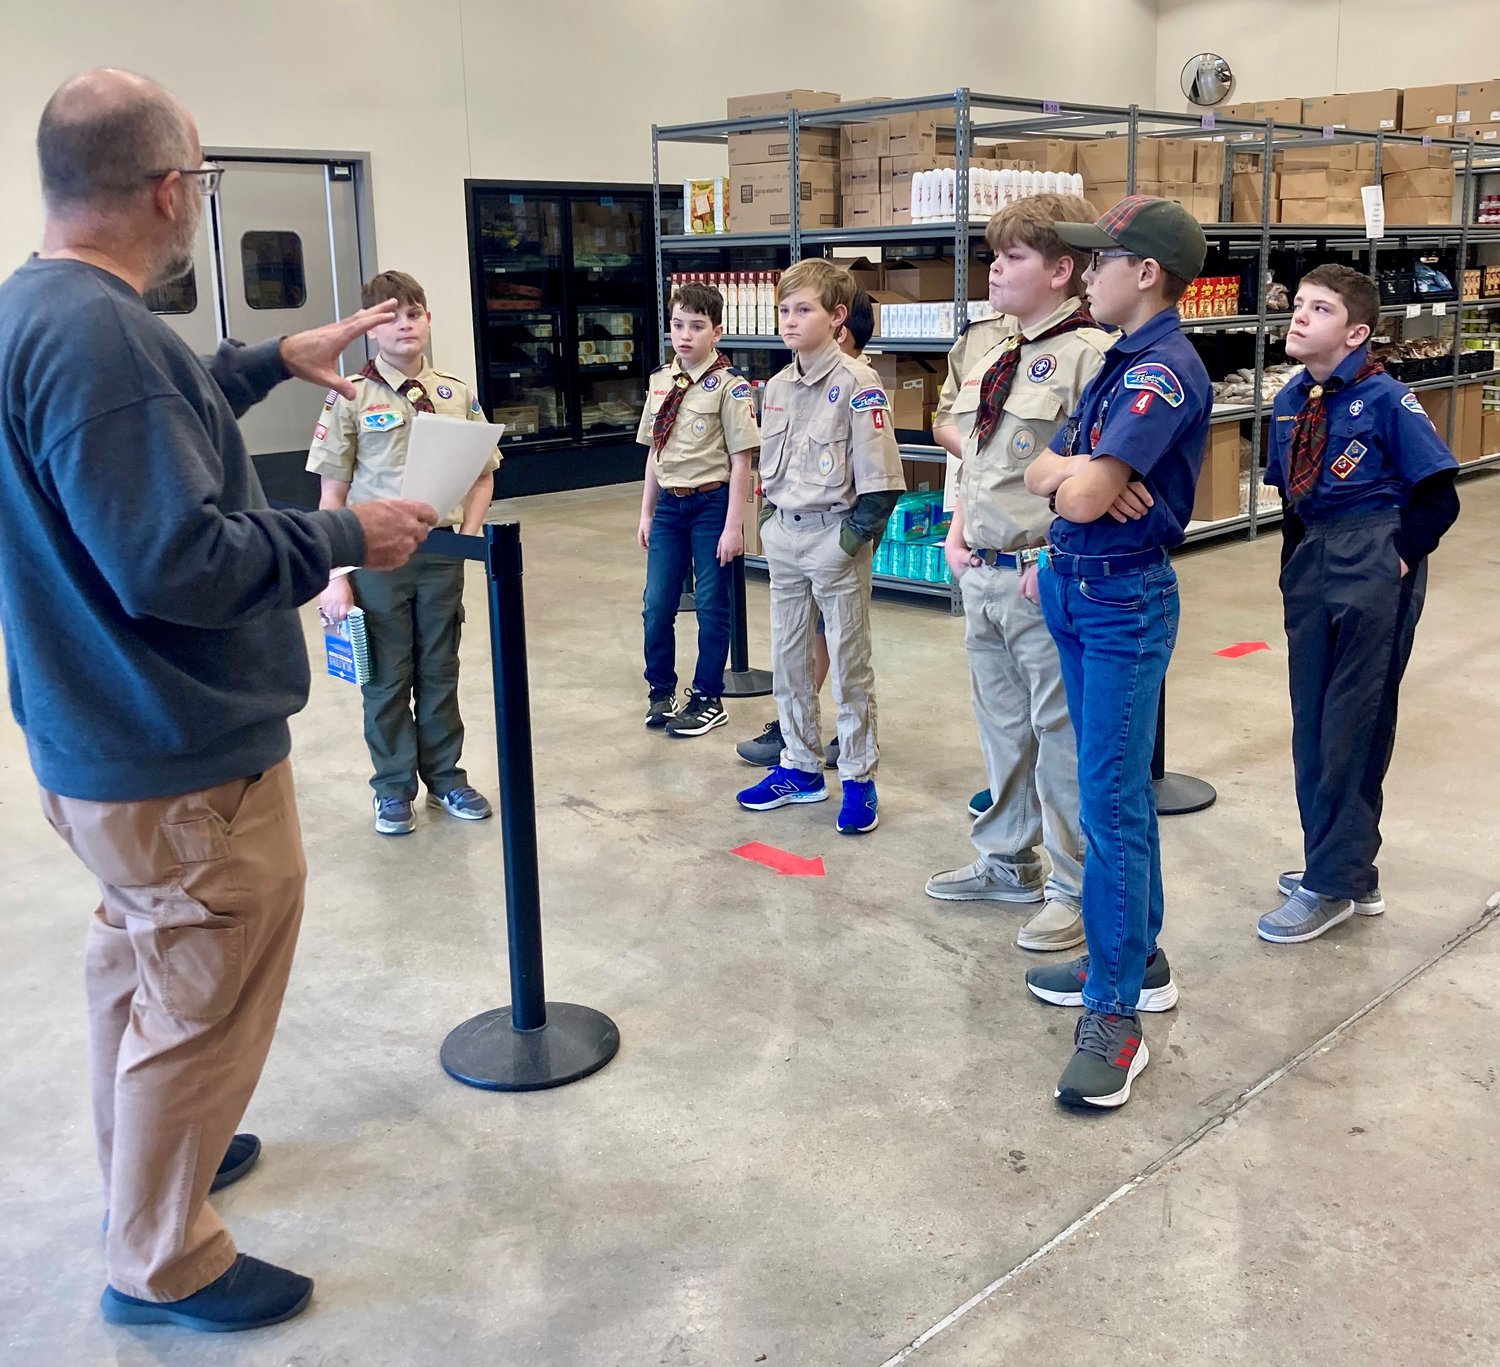 Members of Cub Scout Pack 4 from St. Peter Parish in Jefferson City tour the food pantry in the Catholic Charities Center in Jefferson City in January 2023.